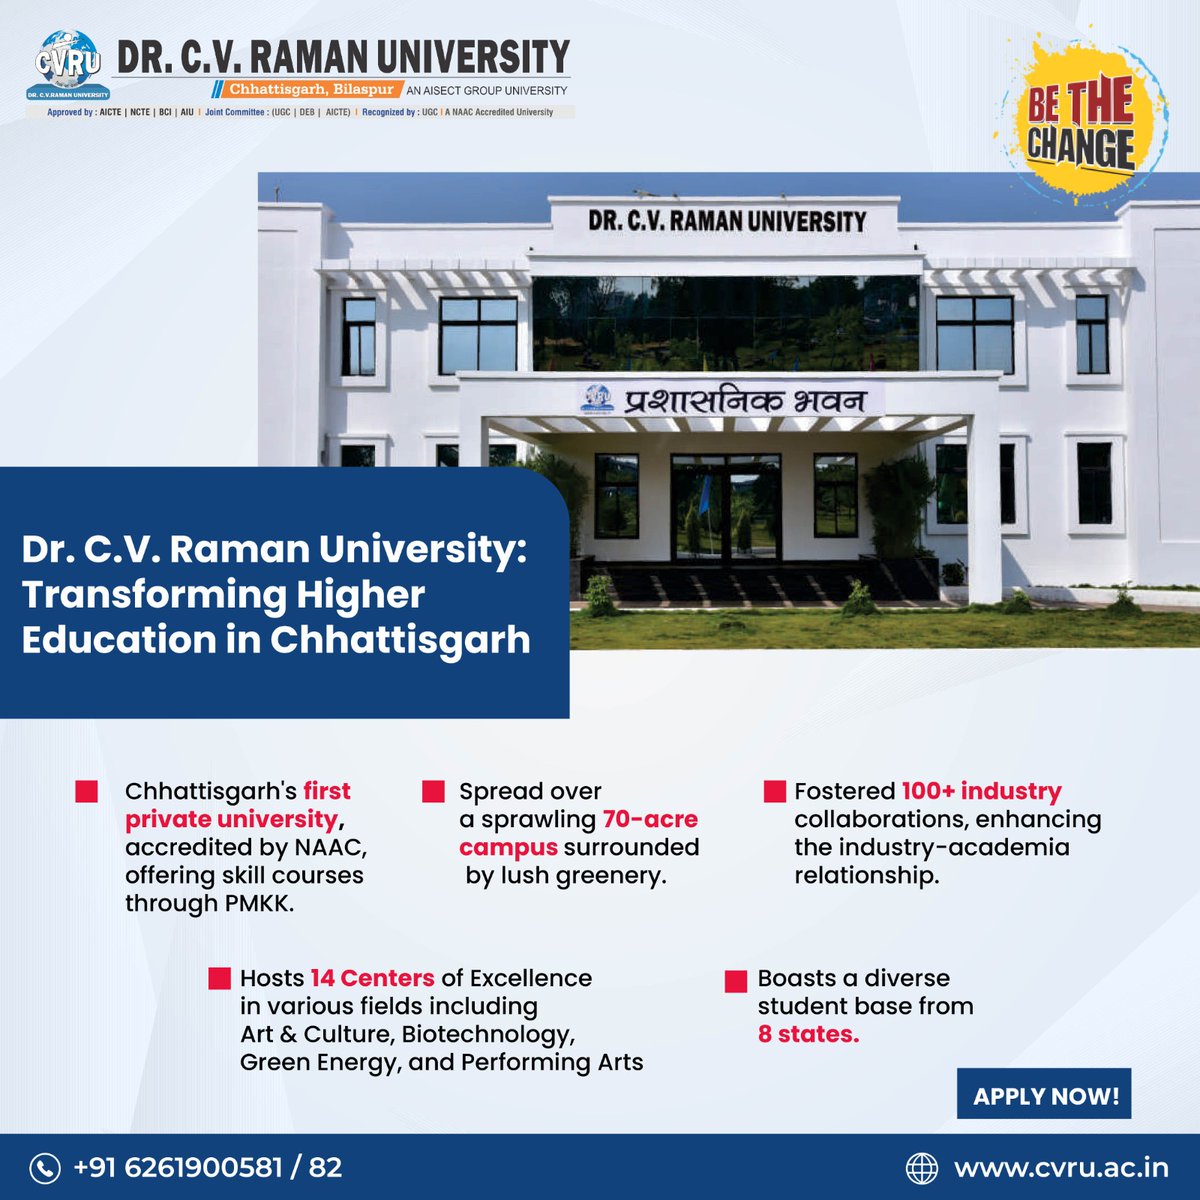 Transform your future at Dr. C.V. Raman University, Chhattisgarh's premier private institution. Accredited by NAAC, offering skill courses through PMKK. With 100+ industry collaborations and 14 Centers of Excellence, join us now!

#CVRamanUniversity #ChhattisgarhEducation